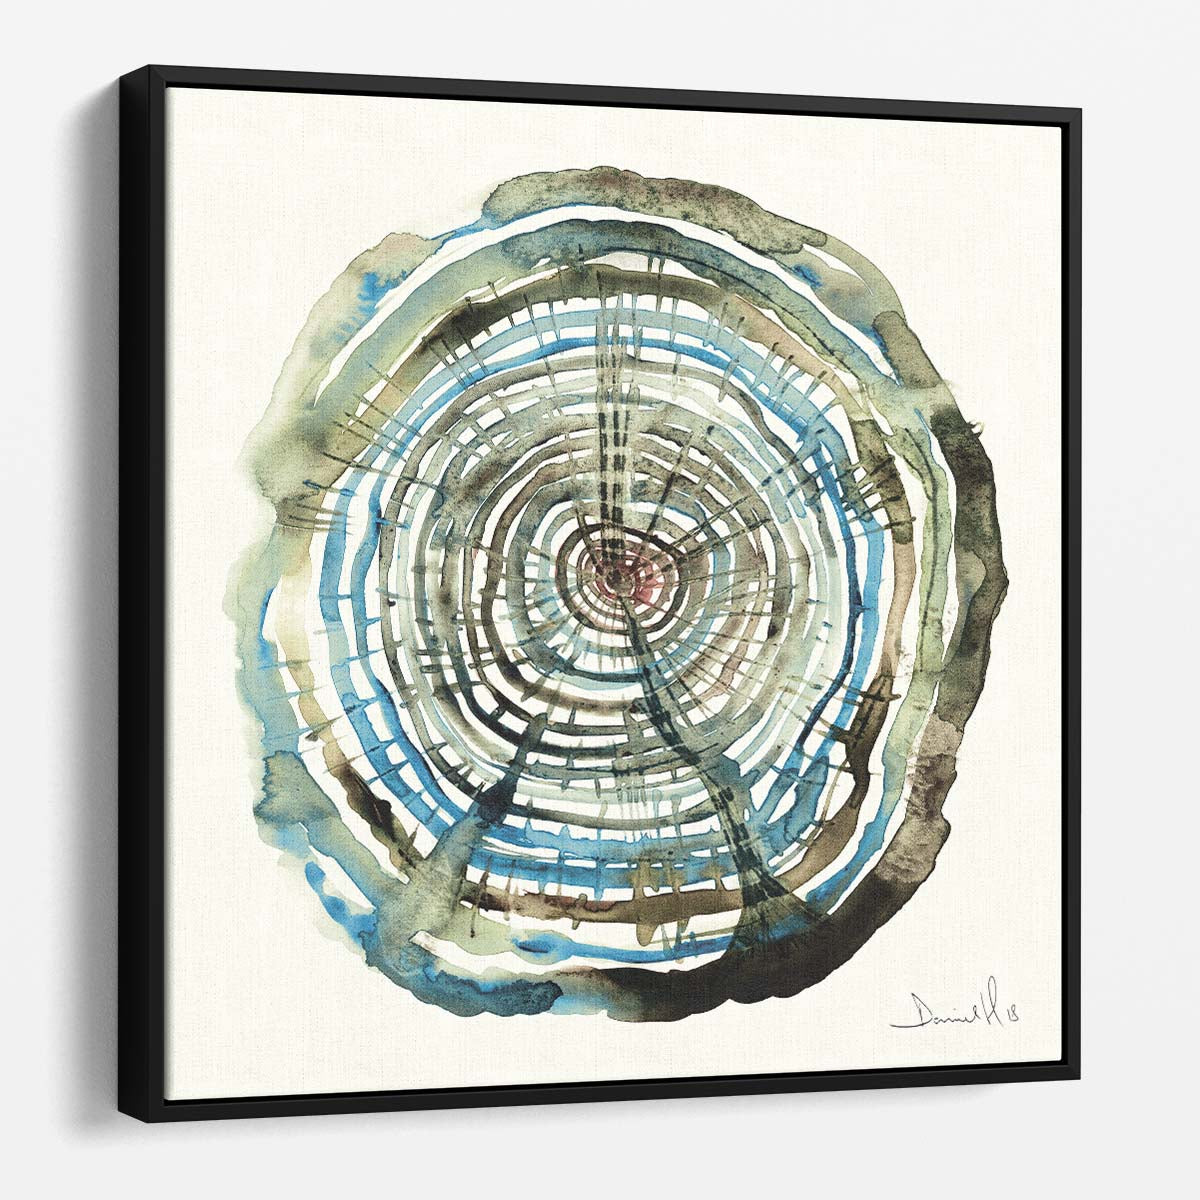 Abstract HandDrawn Watercolor Oak Tree Rings Wall Art by Luxuriance Designs. Made in USA.